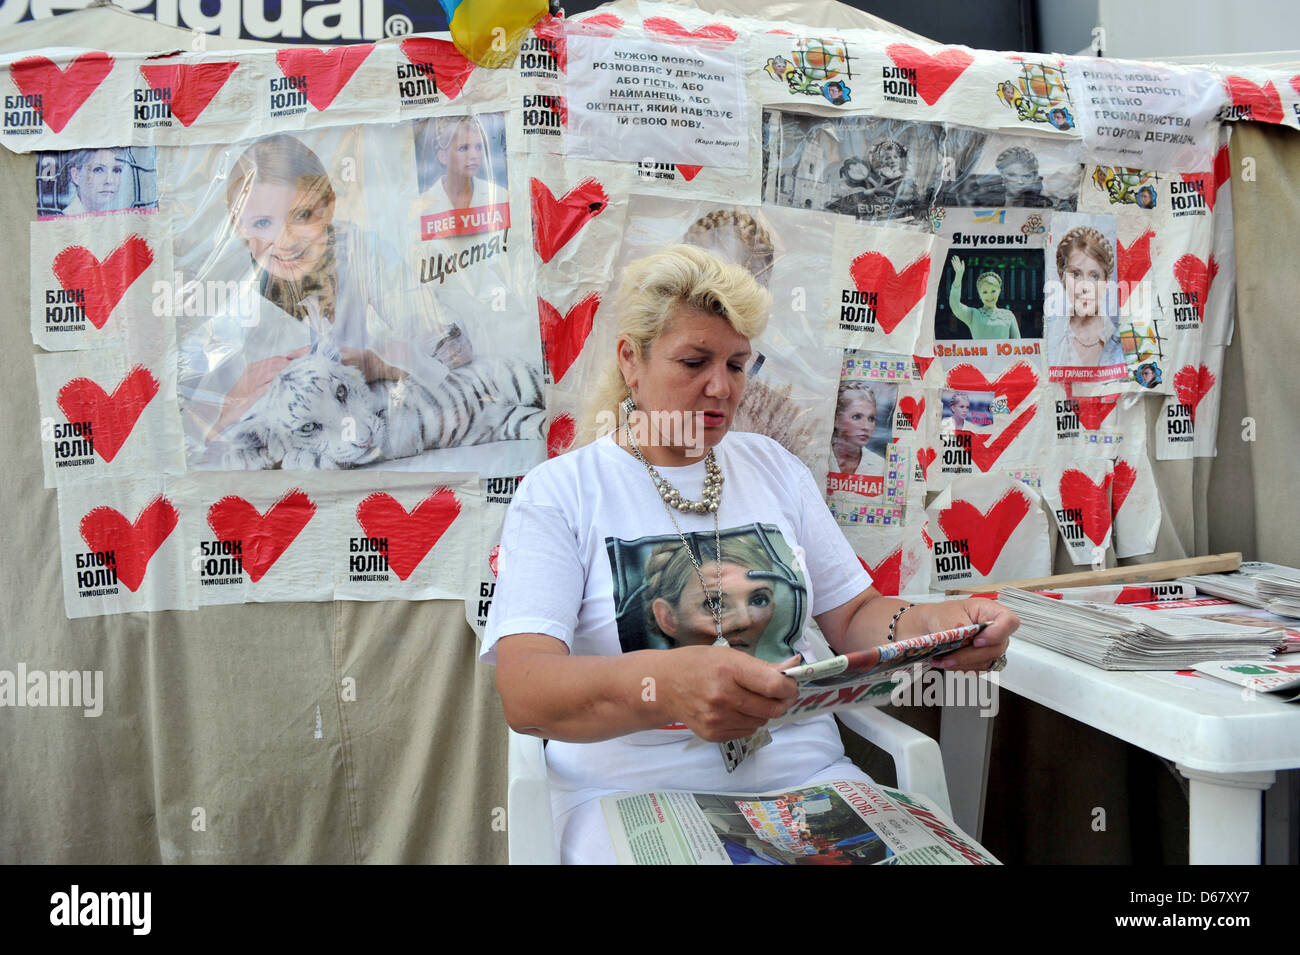 An activist sits in front of photos of the Ukranian politician Yulia Tymoshenko in a protest camp in downtown Kiev, Ukraine, 30 June 2012. The Euro 2012 championships were discussed controversially over the case of Ukraine's jailed former Prime Minister Yulia Tymoshenko. Photo: ANDREAS GEBERT Stock Photo